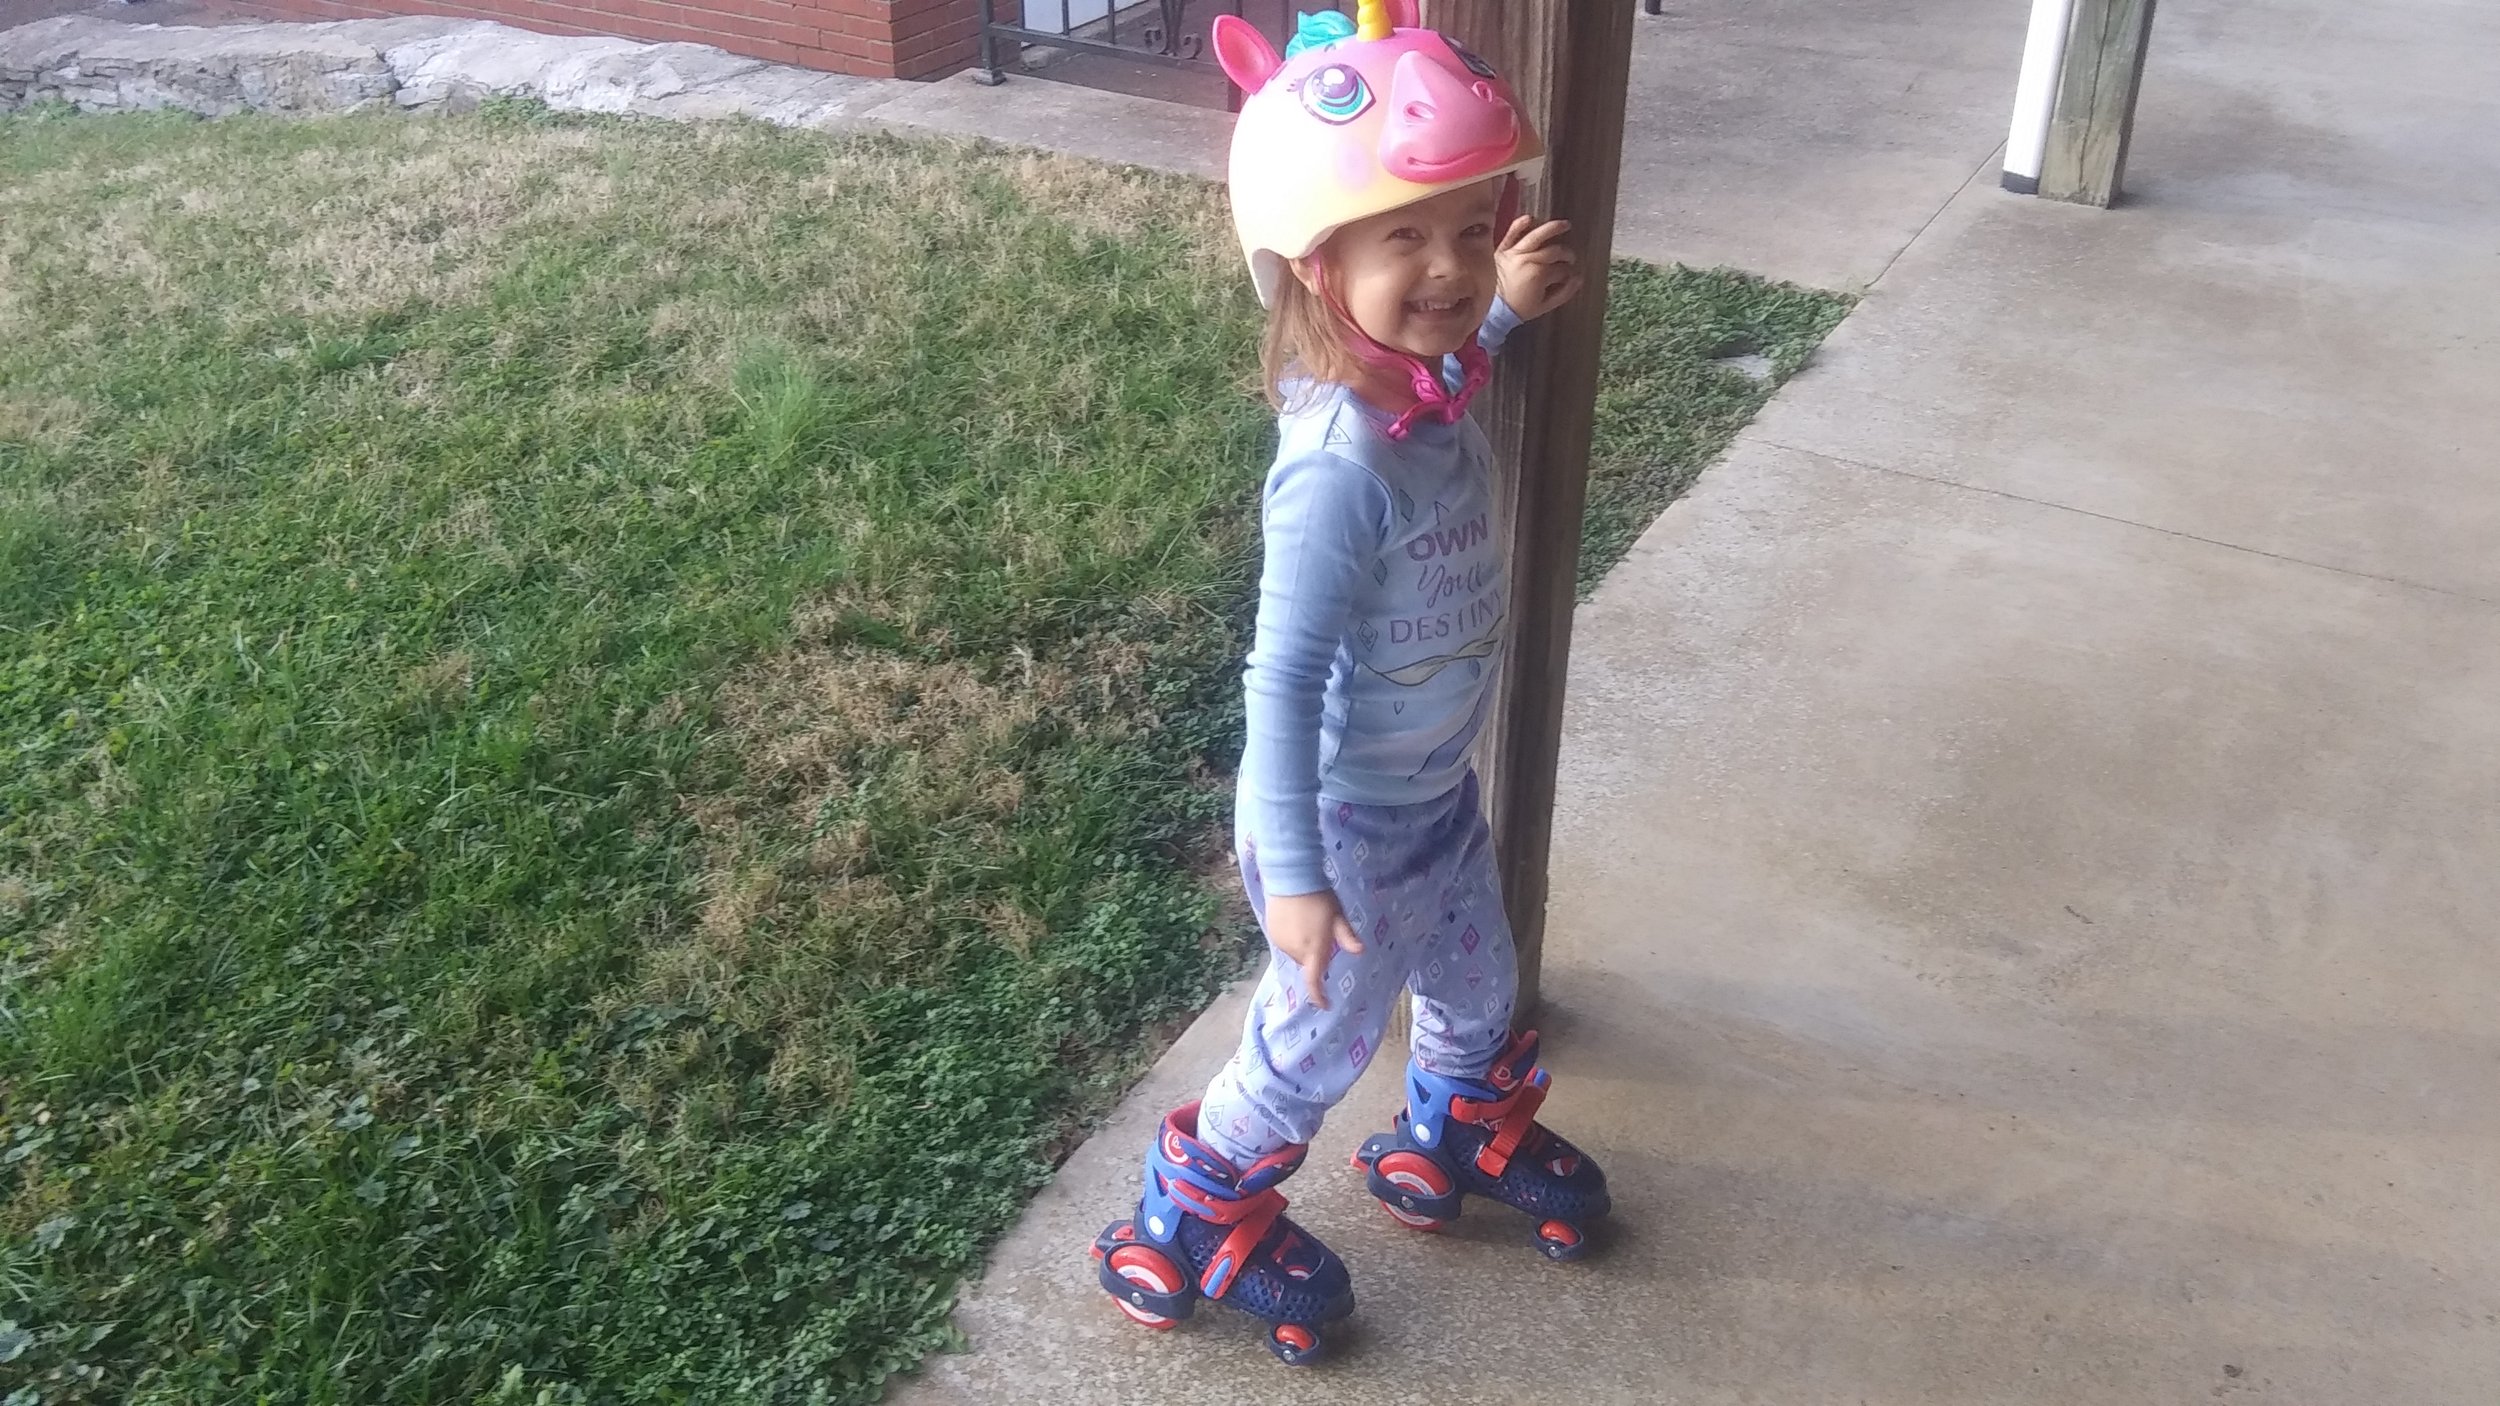  Loving her skates. She learned so quickly 